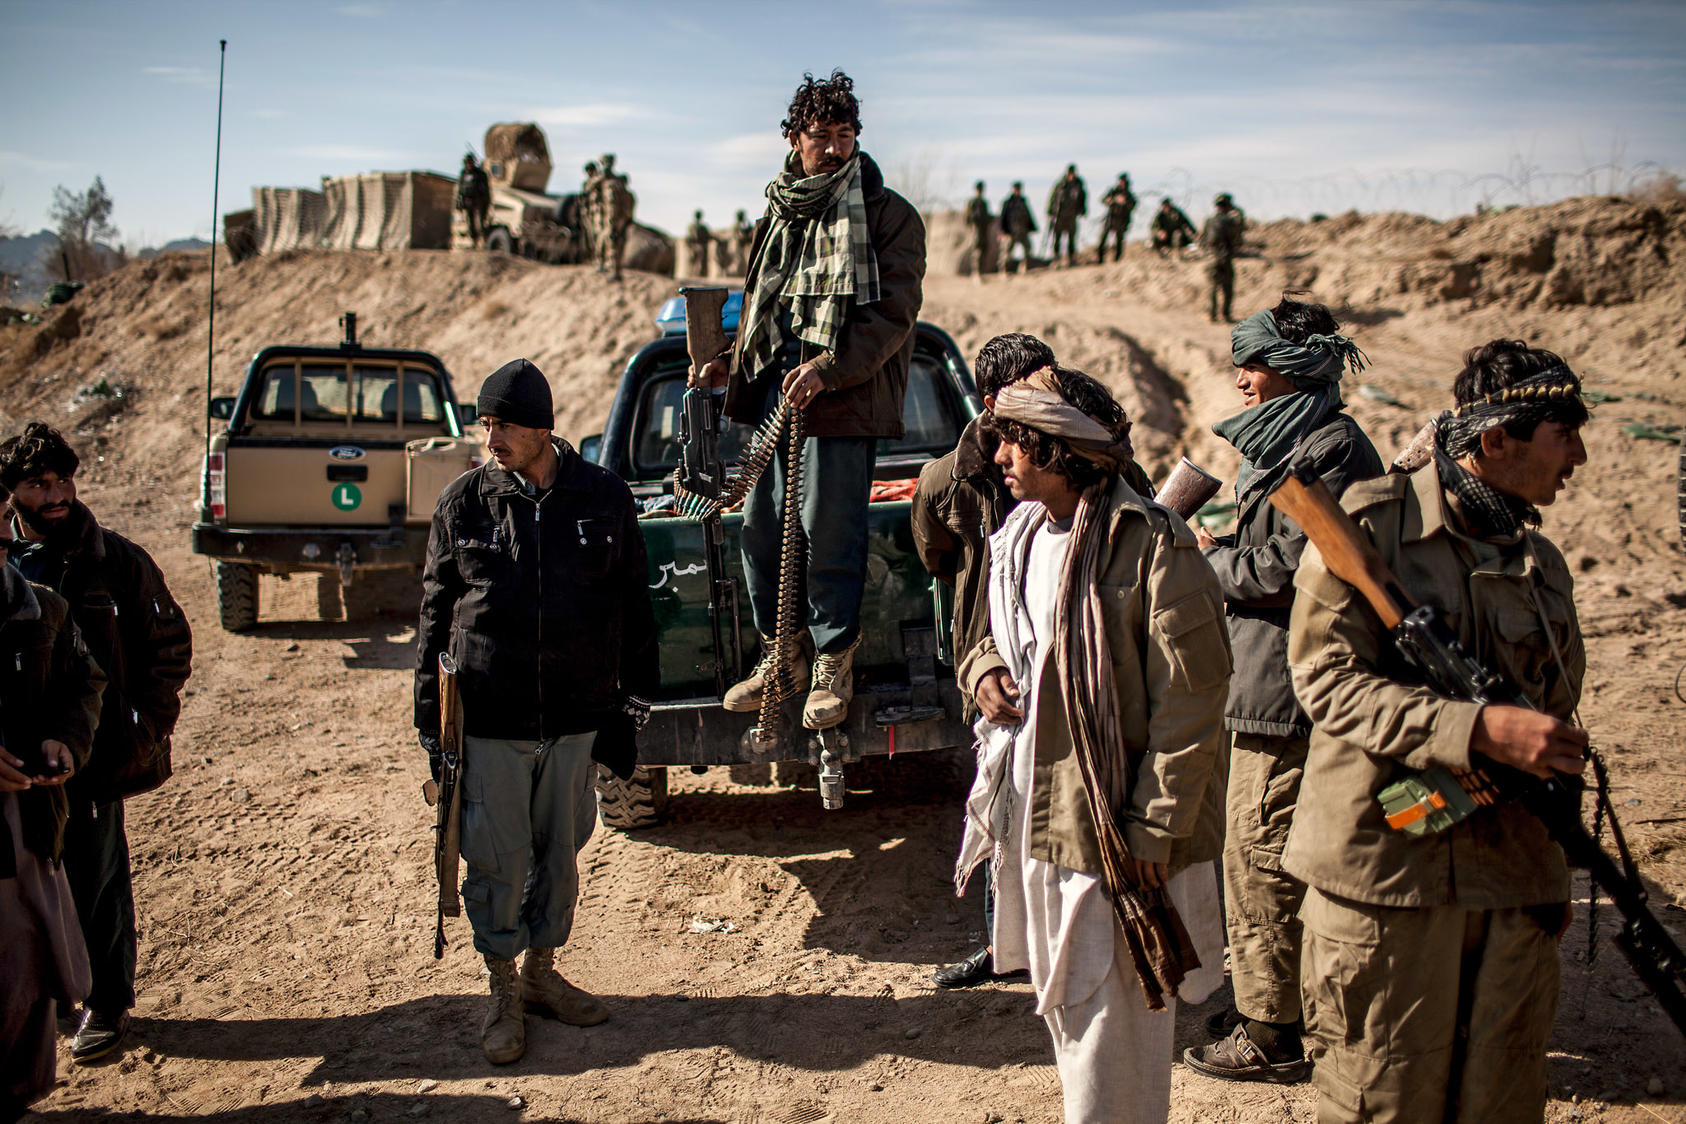 Members of the Afghan Local Police prepare for a mission in Kakeran, Afghanistan, Feb. 18, 2013. An American military plan for local auxiliaries to aid the Afghan Army has raised fears of abuses like those that plagued the Afghan Local Police. (Bryan Denton/The New York Times) 